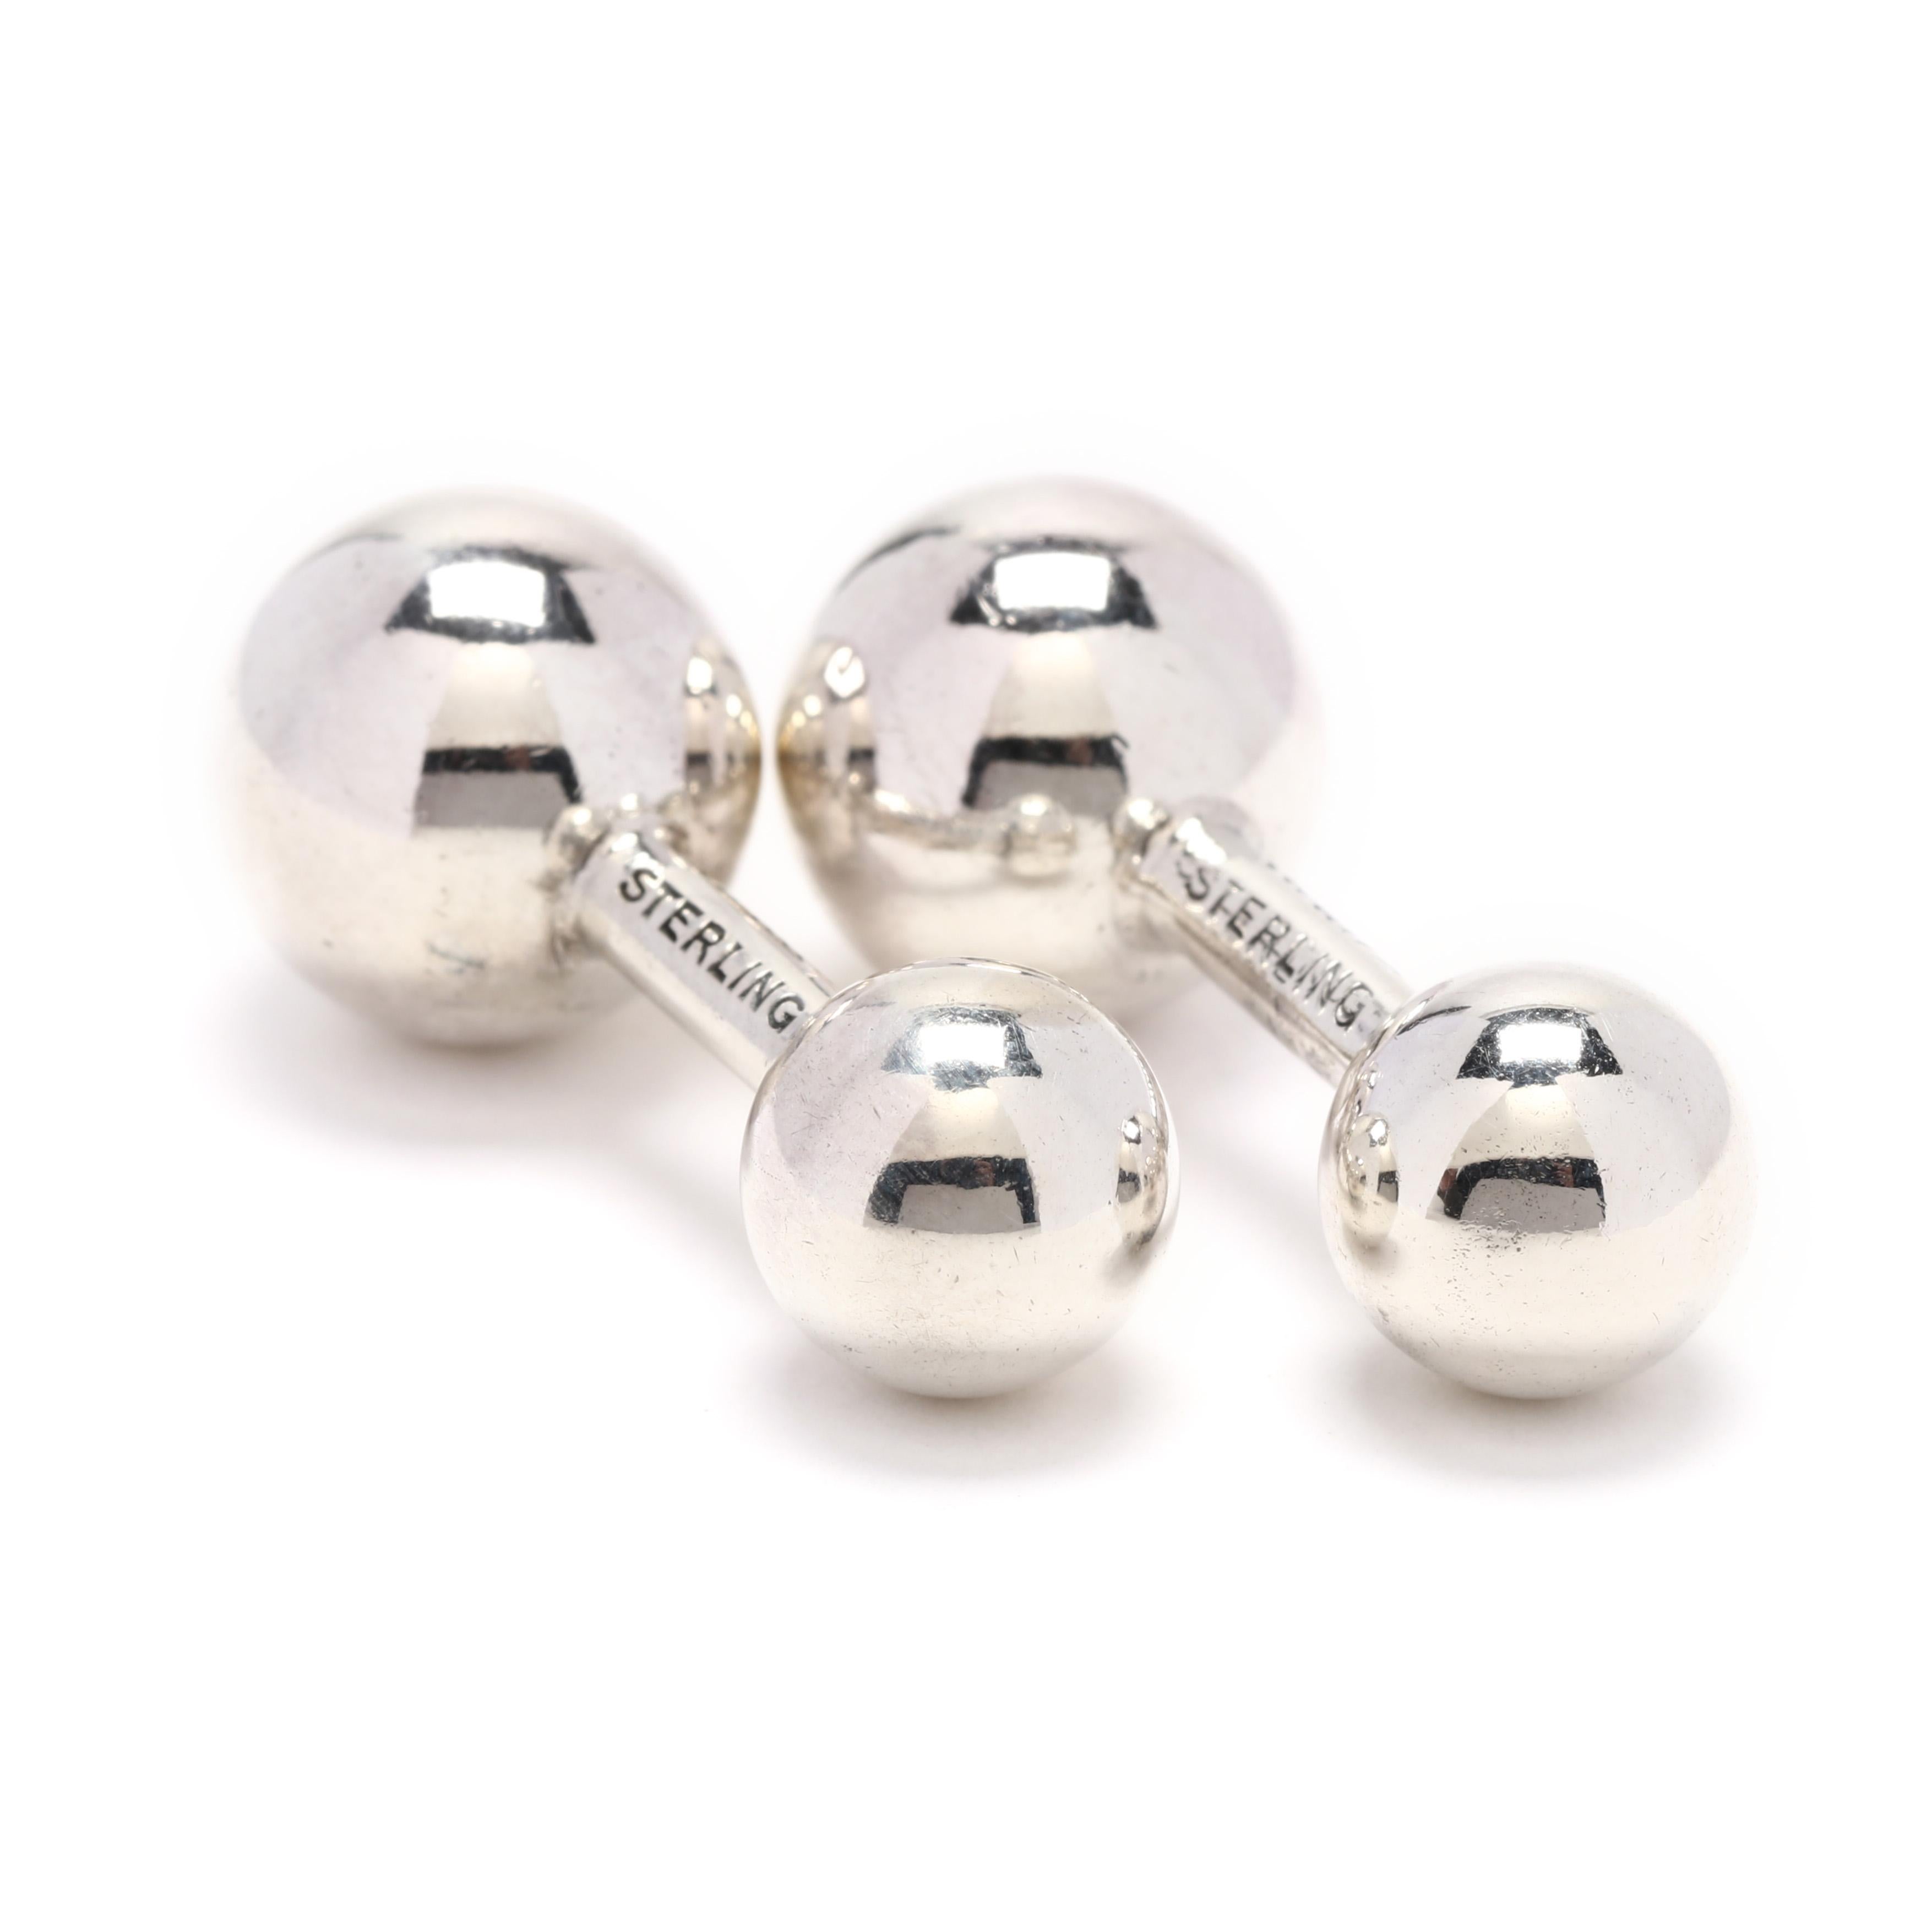 A pair of sterling silver Cartier dumbbell cufflinks. These cufflinks feature a large polished sphere at one end and a smaller sphere at the other end.



Length: 1 3/16 in.



Width: 1/2 in.



Weight: 7.9 grams